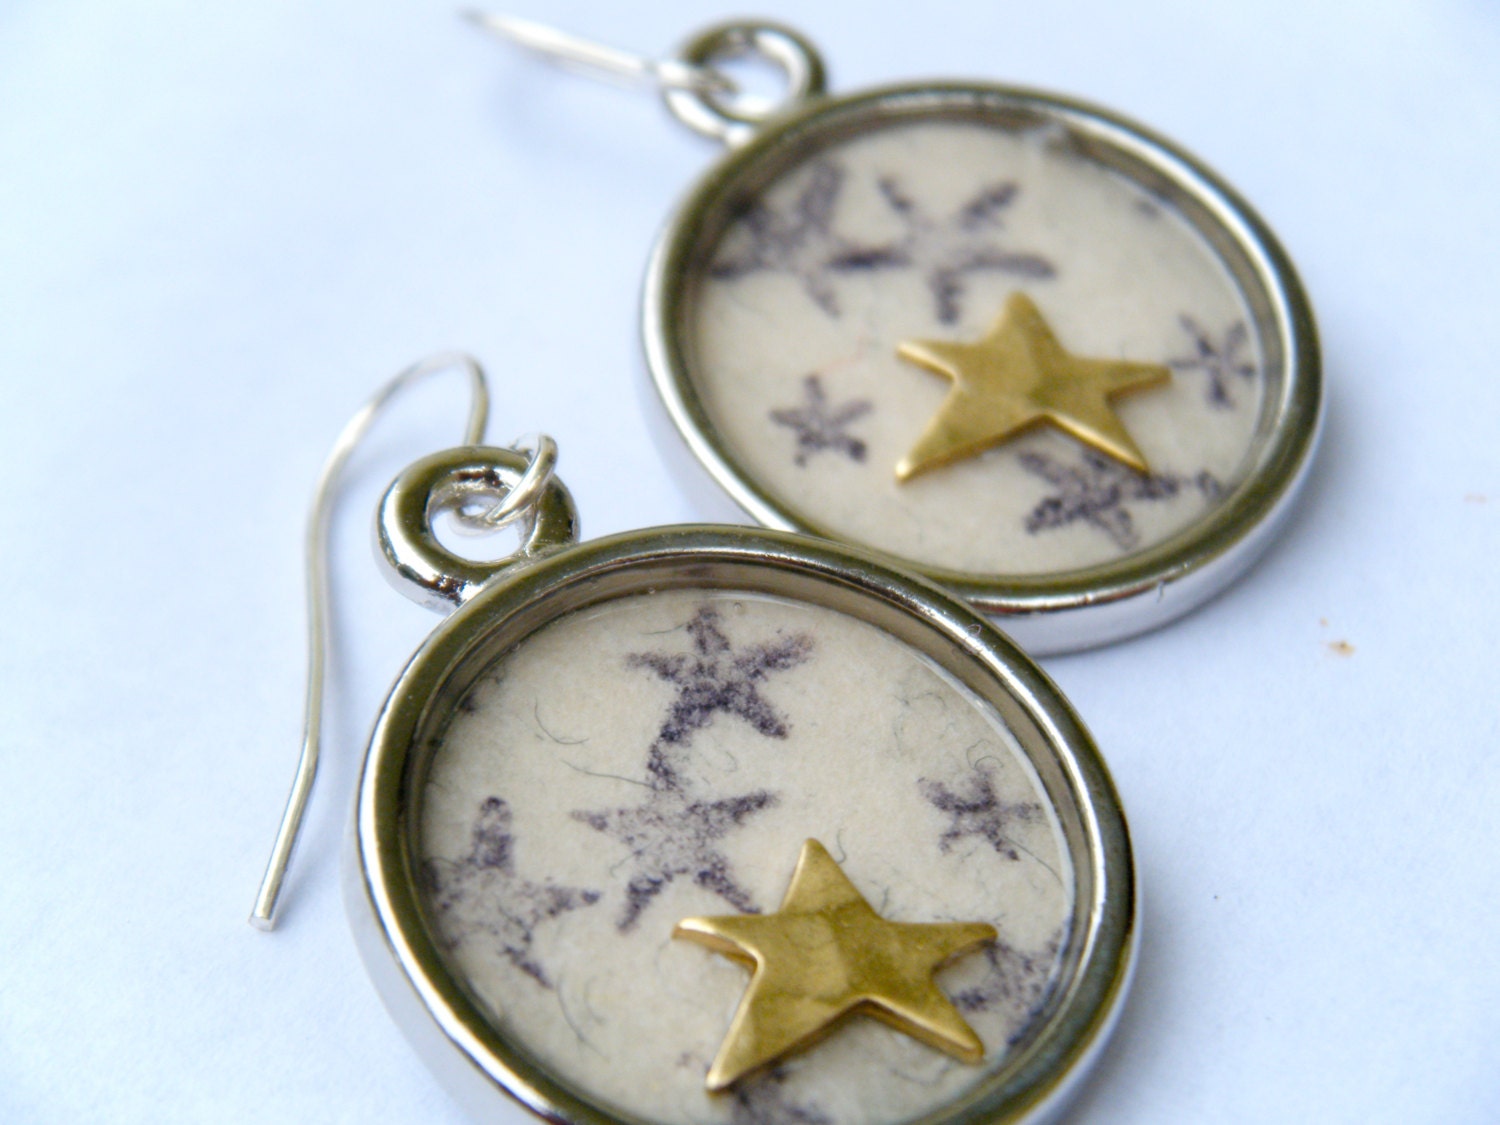 OOAK Silver Gold Star Earrings Dangle Recycled Materials Paper Hooks Circle Jewelry Upcycled Repurposed Brass Black Stamp Celestial Night - HeidiKindFinds